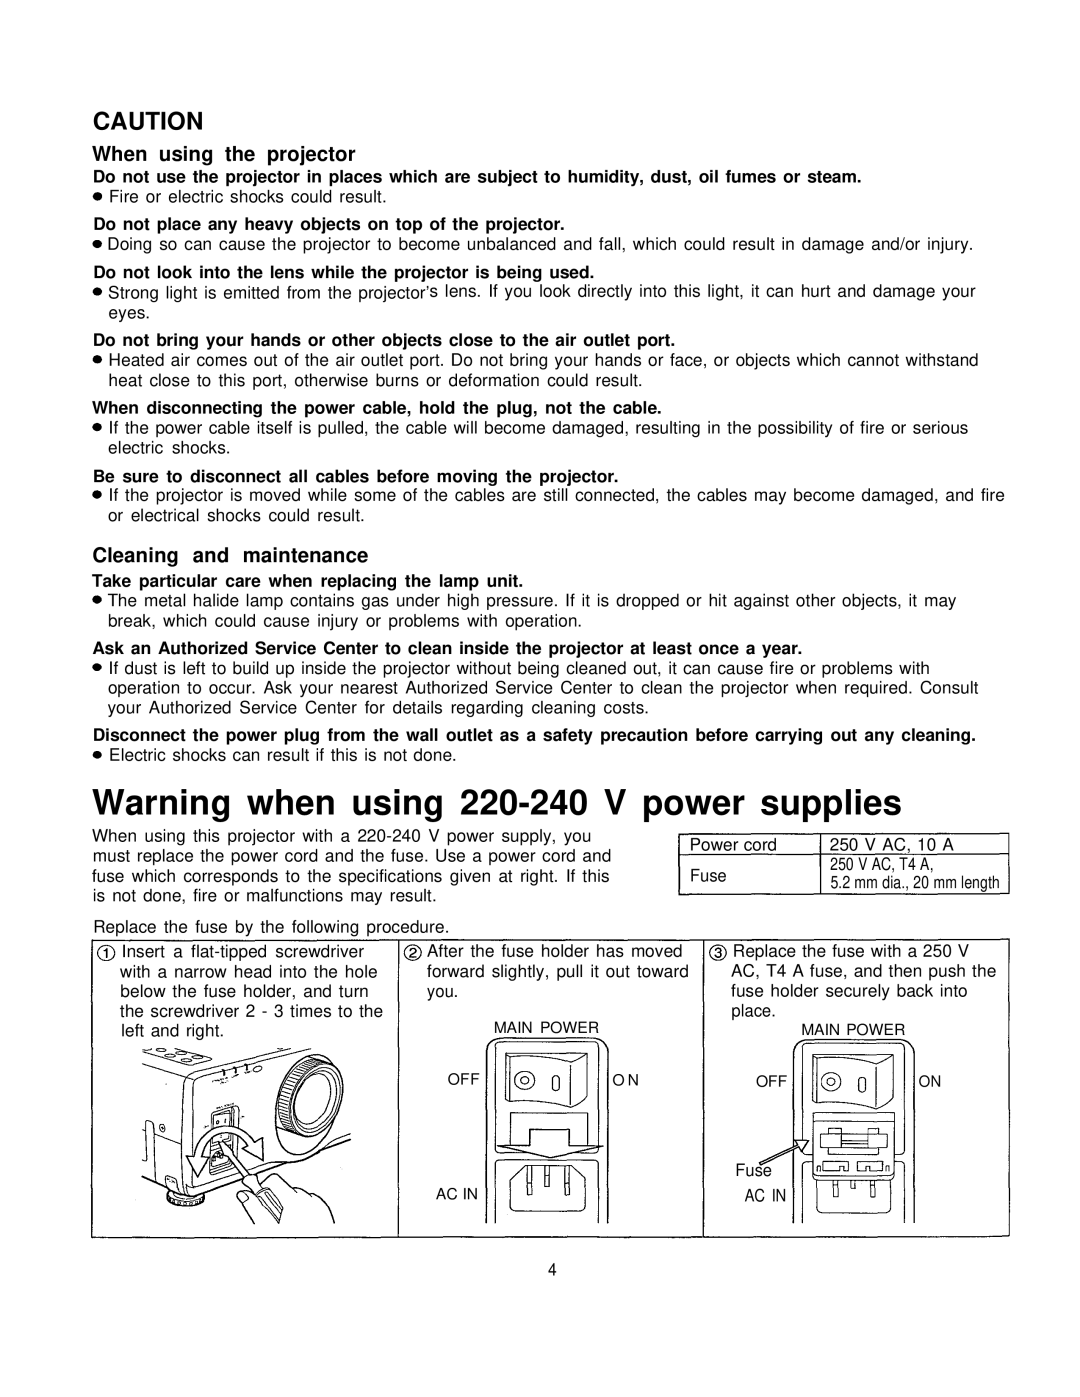 Panasonic PT-L795U manual Warning when using 220-240 V power supplies, When using the projector, Cleaning and maintenance 